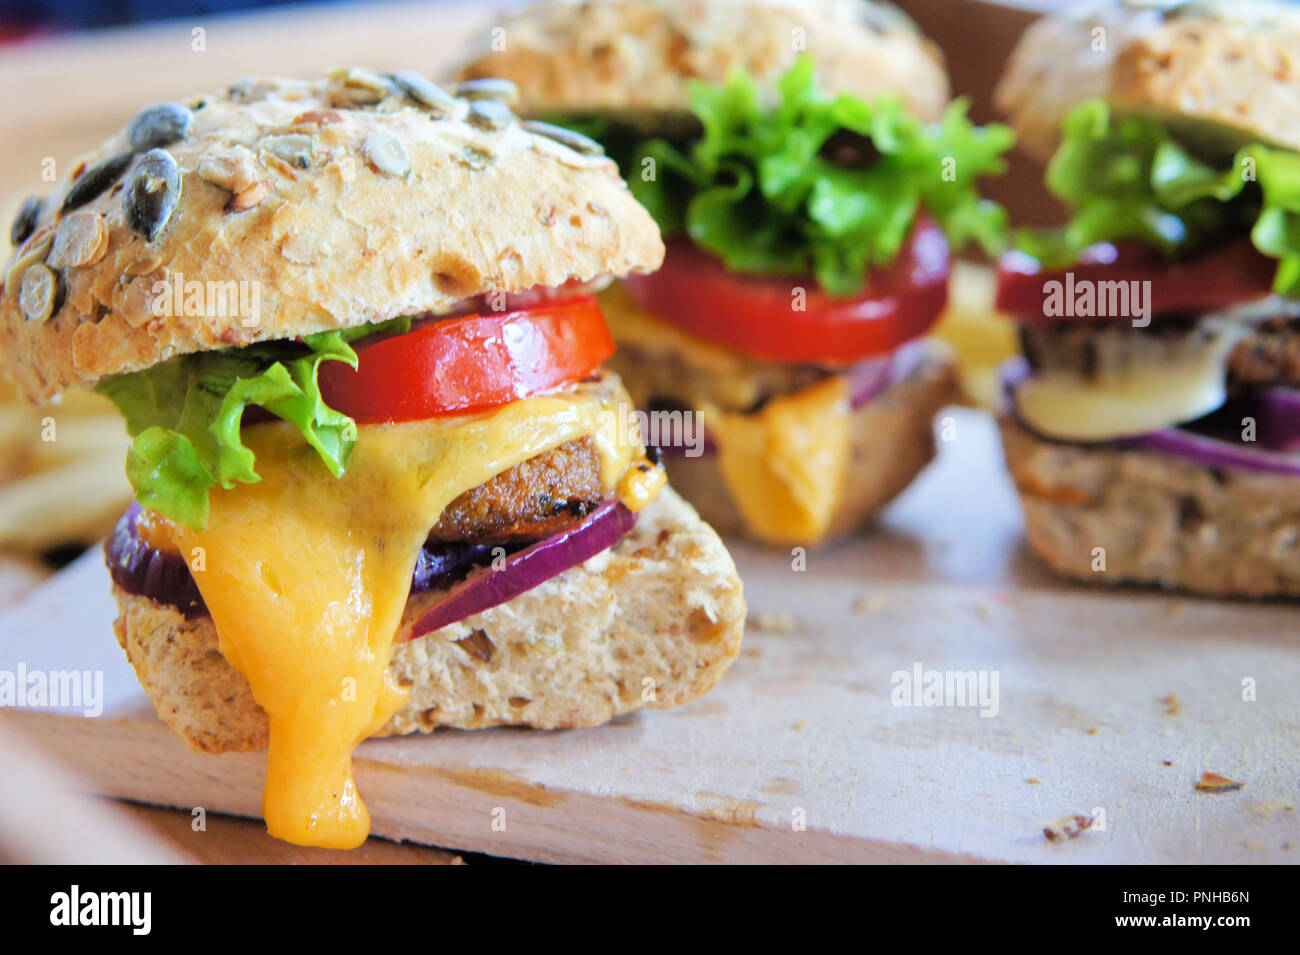 Several small cheeseburger sliders made from worm burger patties. The insect burgers are made from buffalo worms, which are the larvae of the darkling Stock Photo